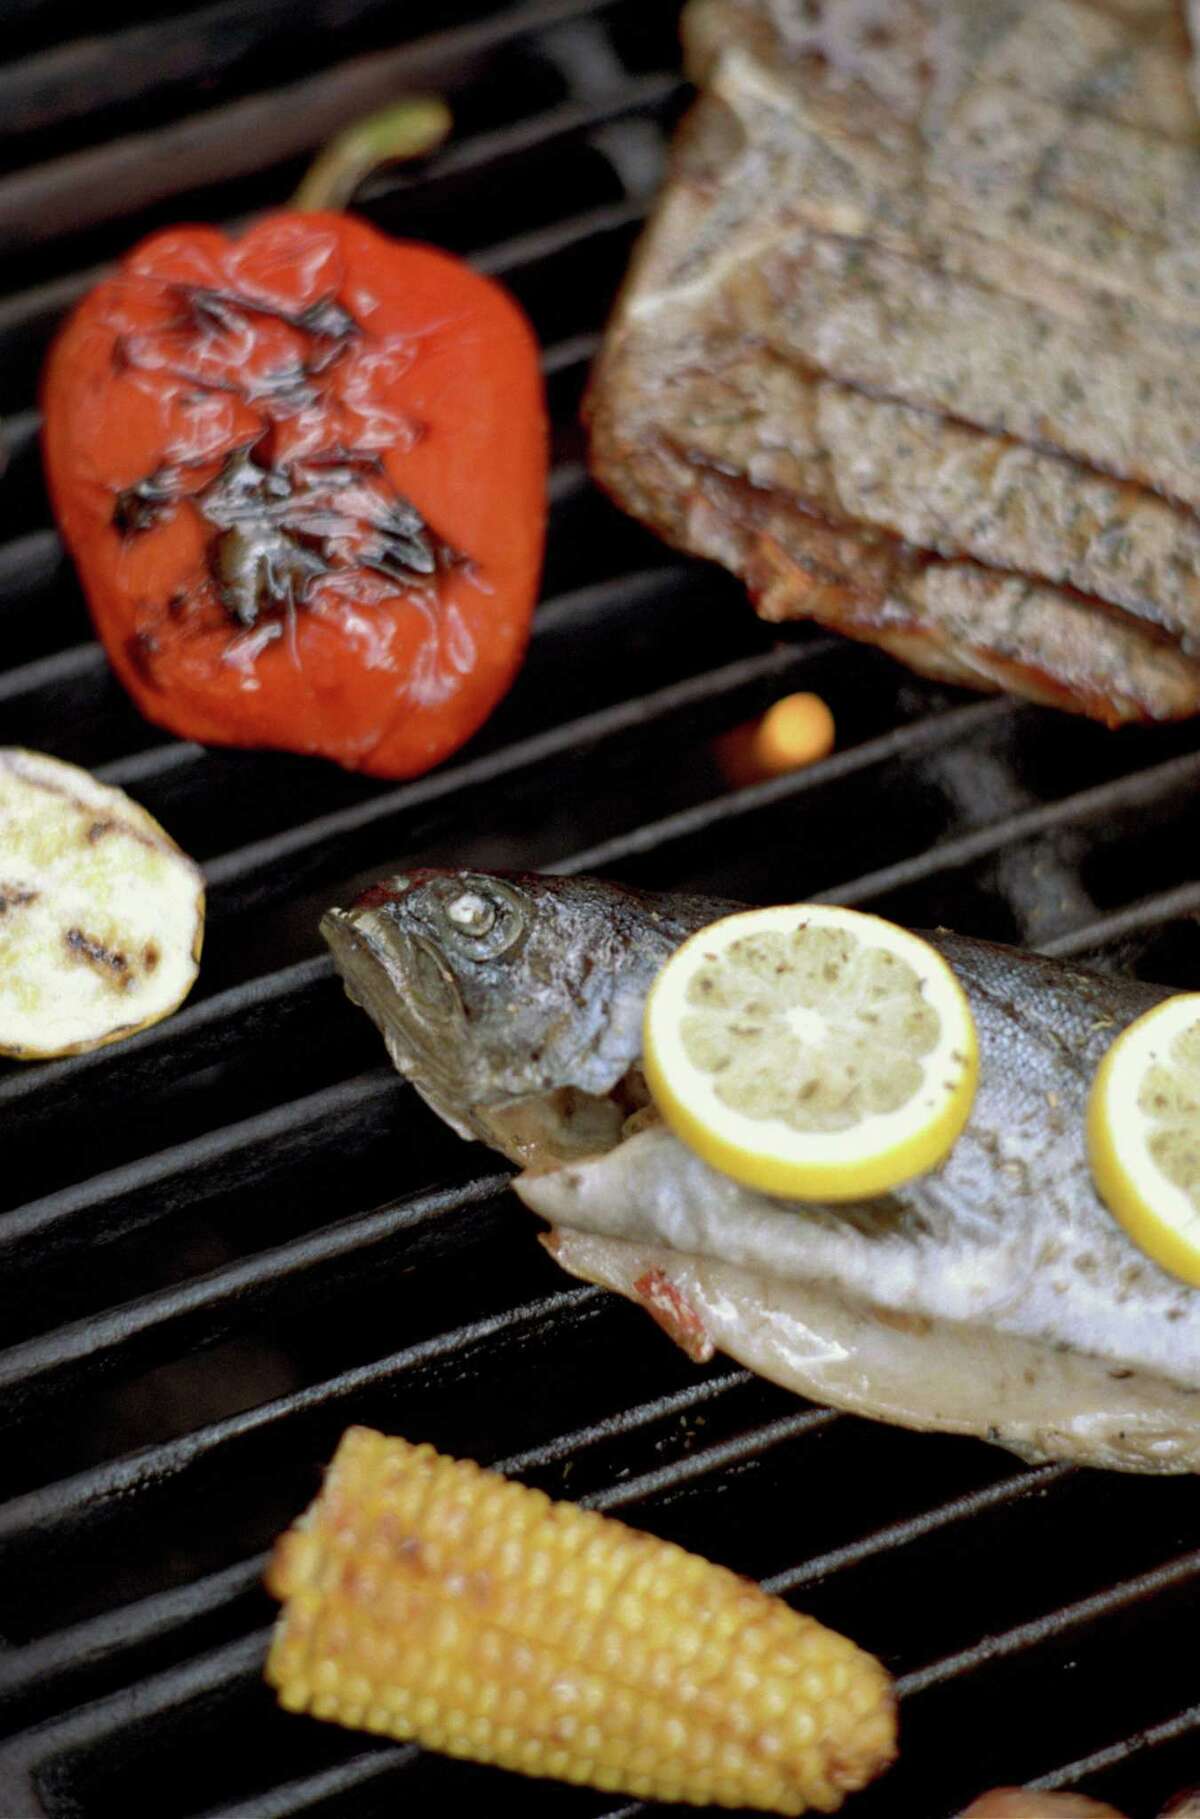 Throw some trout and veggies on the grill along with your steak.